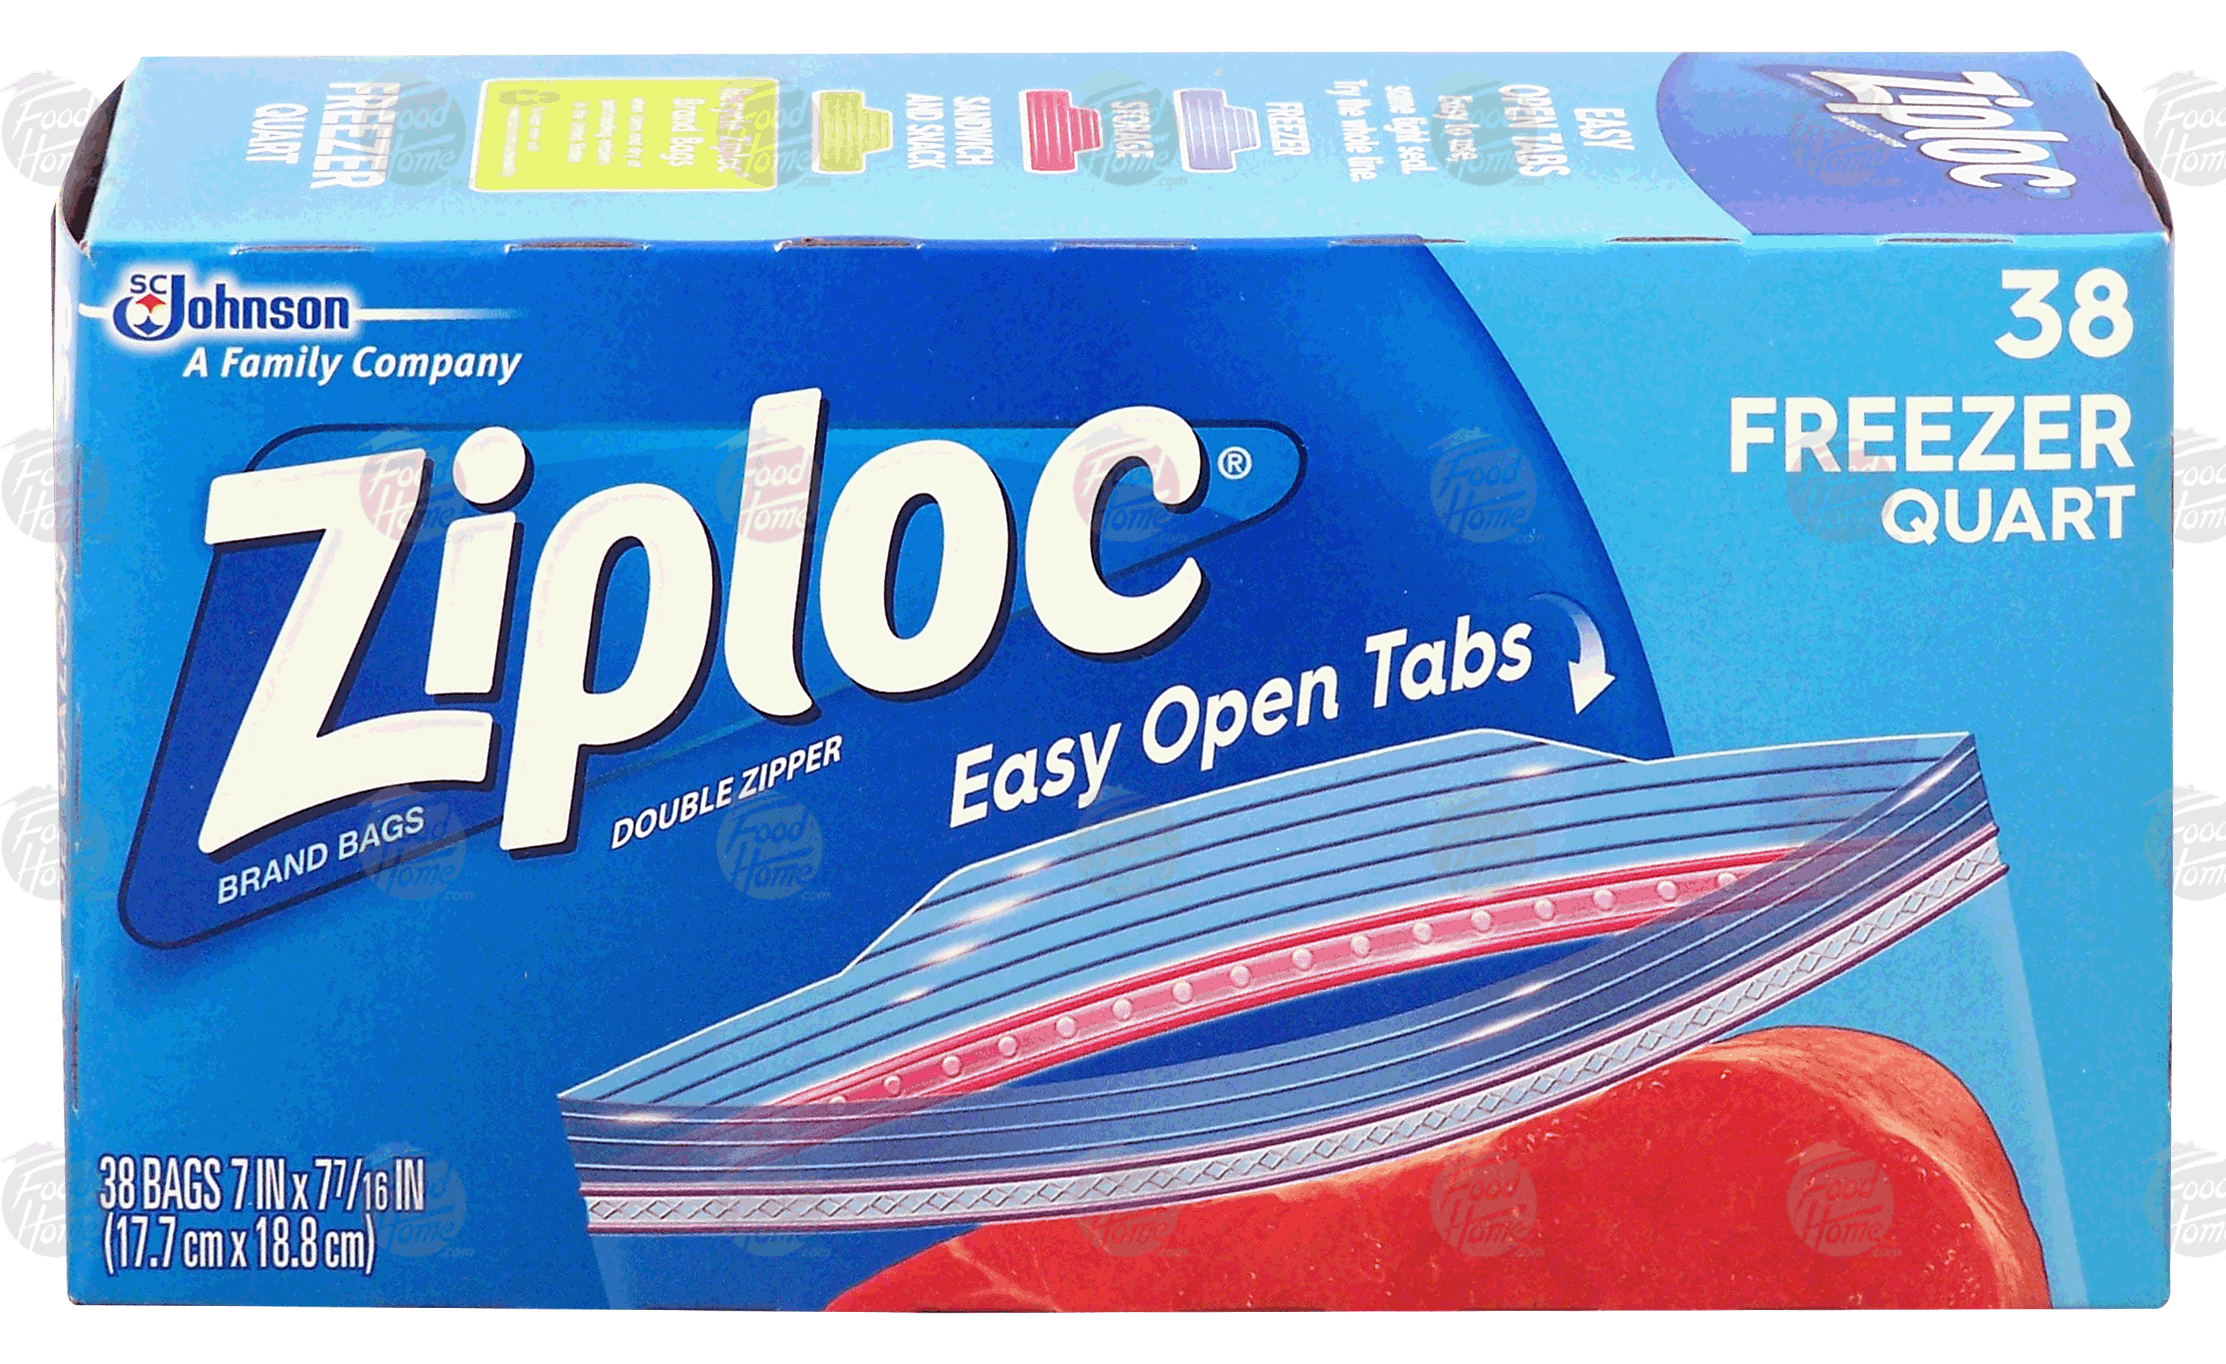 Groceries-Express.com Product Infomation for Ziploc double zipper 